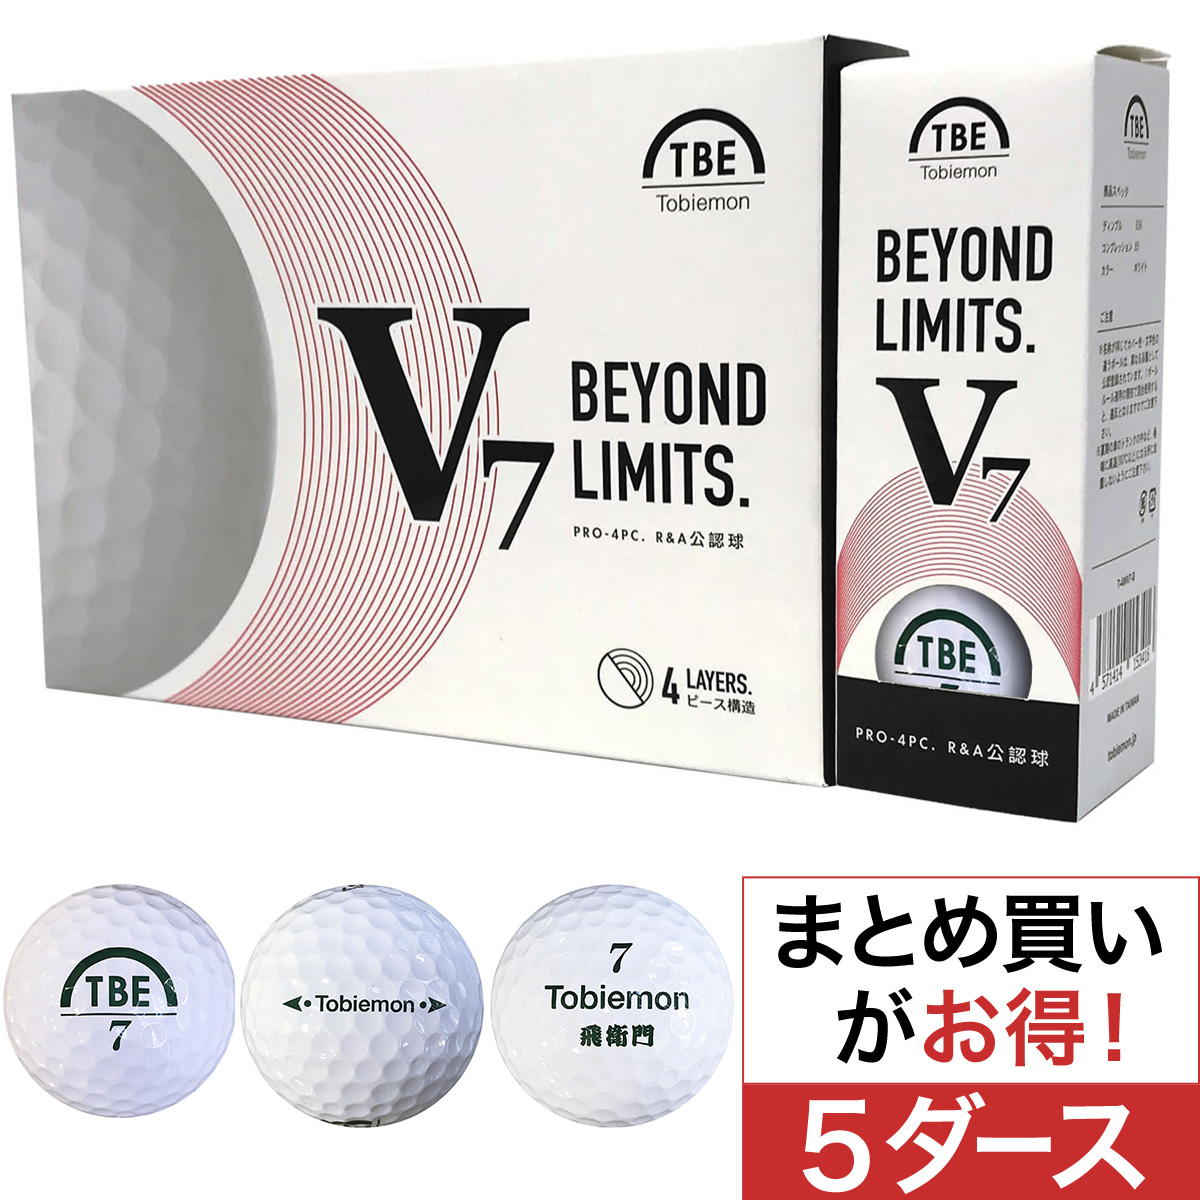  BEYOND LIMITS V7 ボール 5ダースセット 